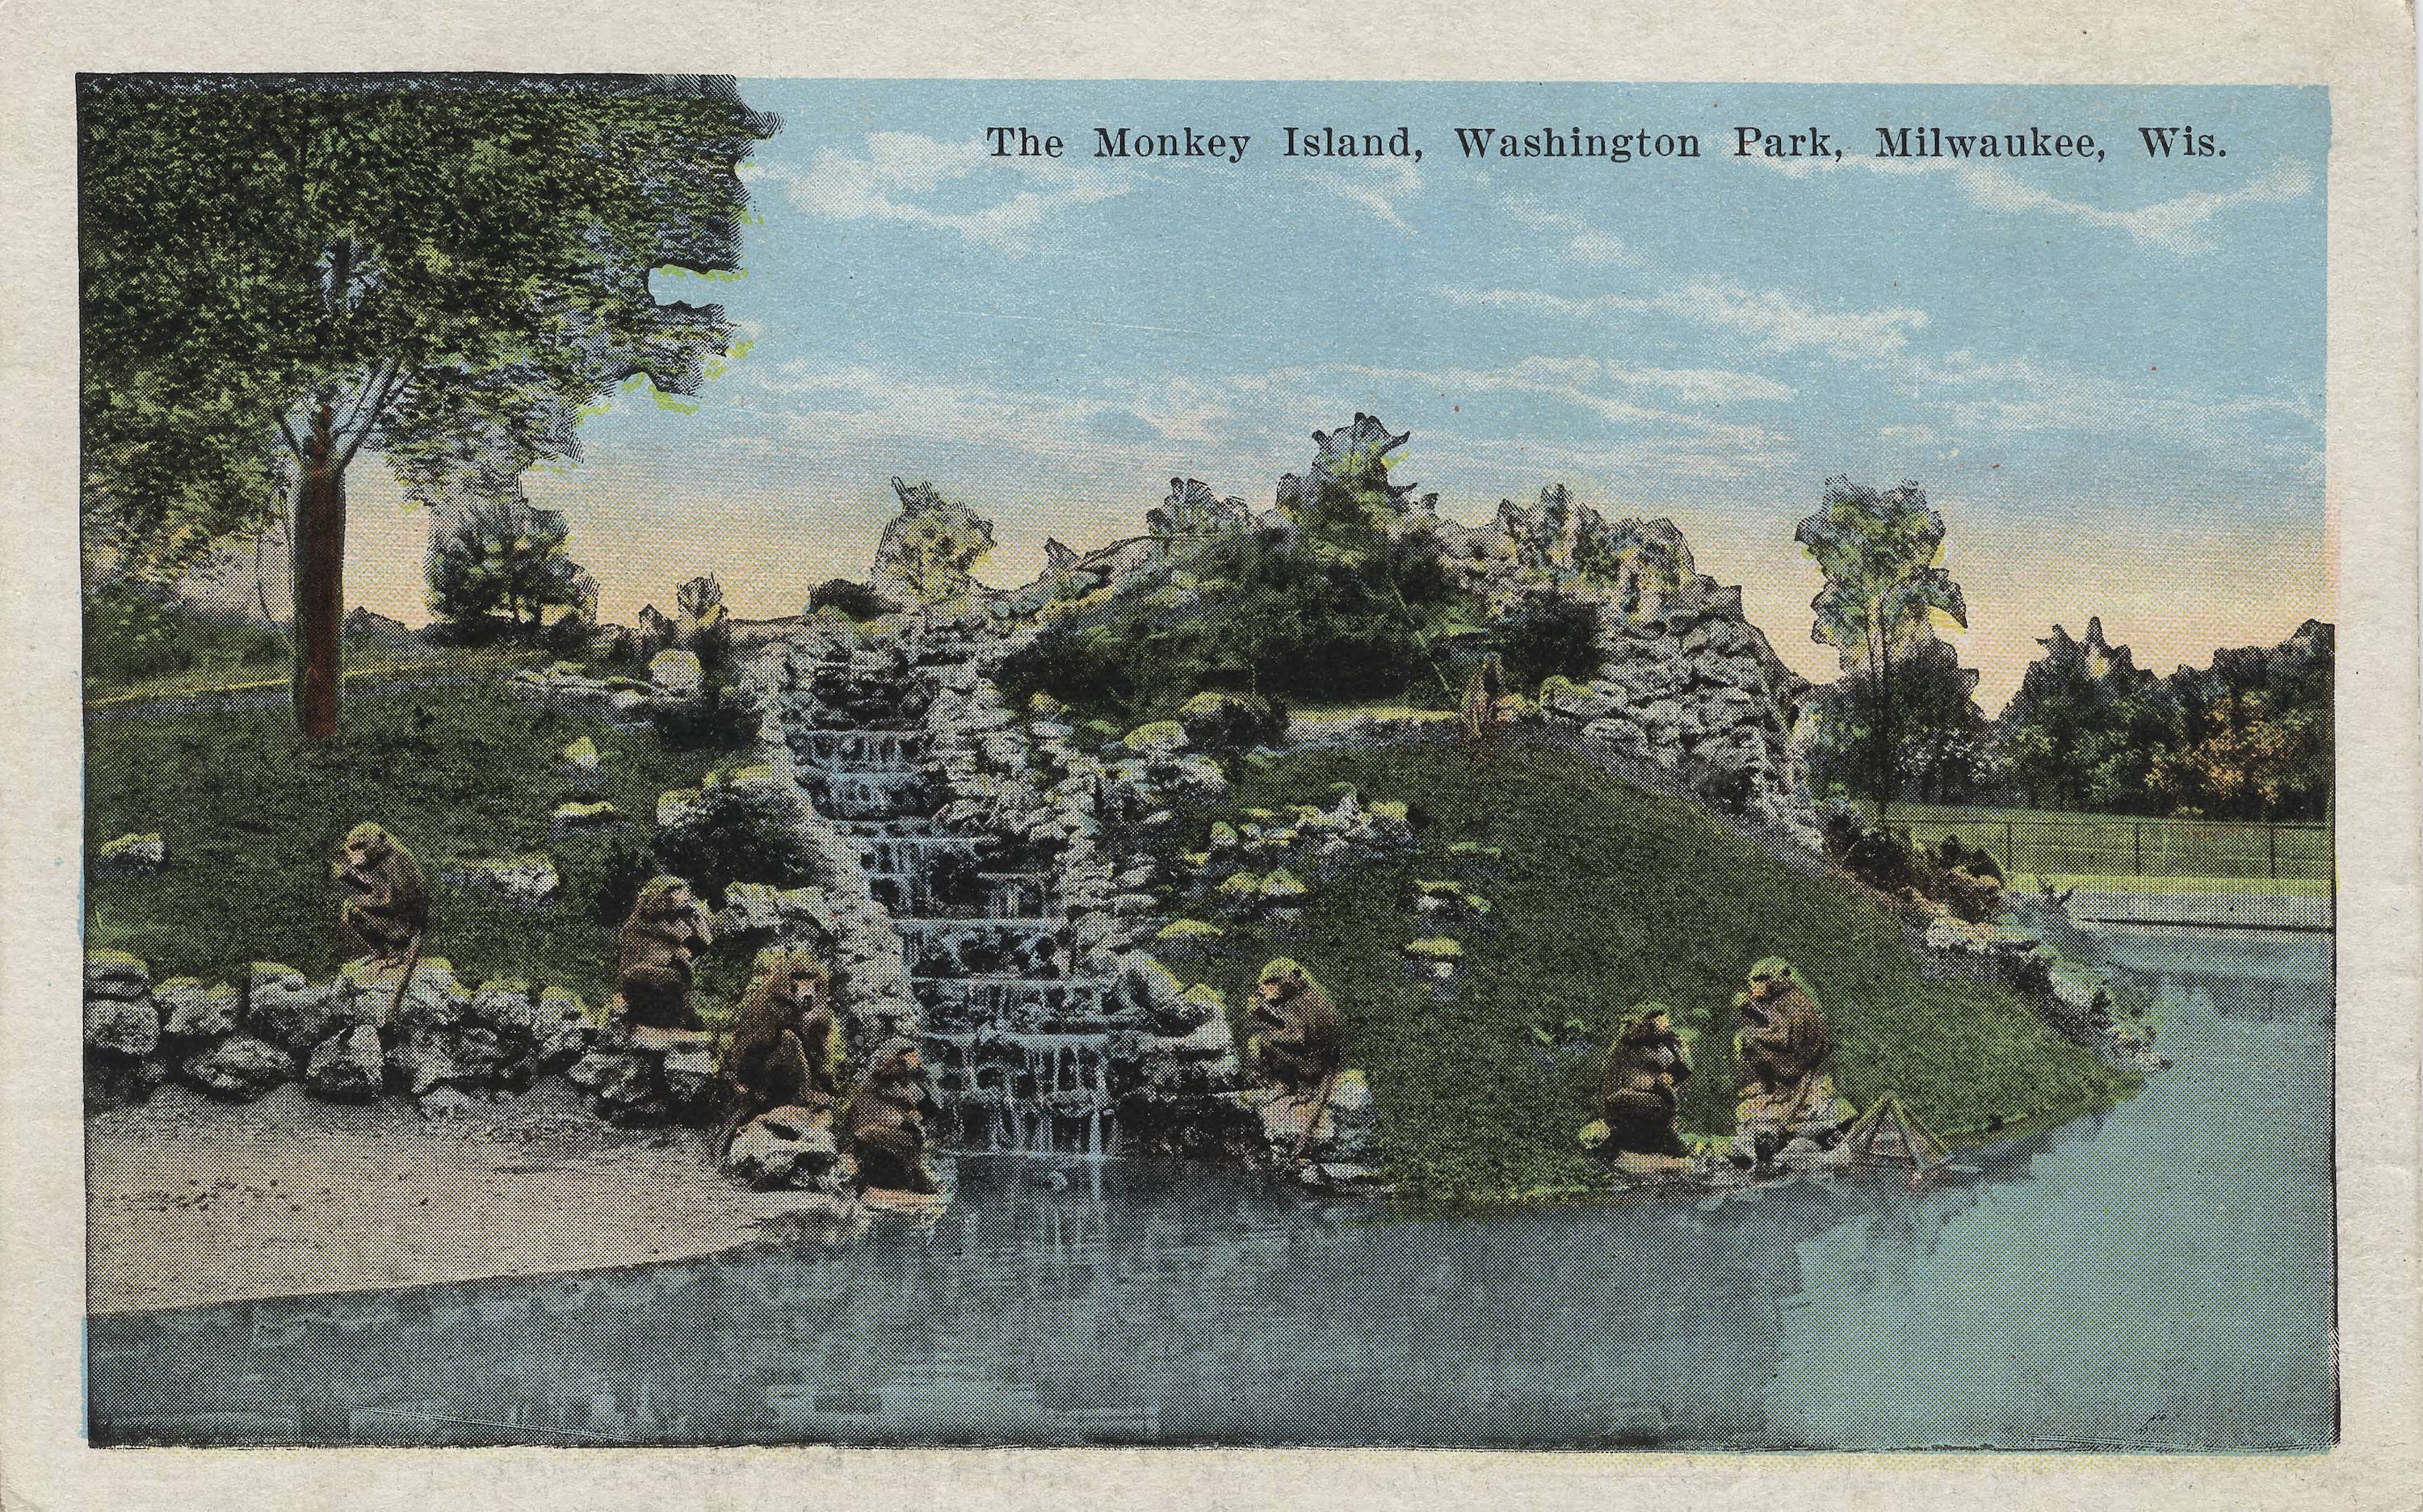 One of Washington Park's first popular animal exhibits was Monkey Island, illustrated on this 1927 postcard.